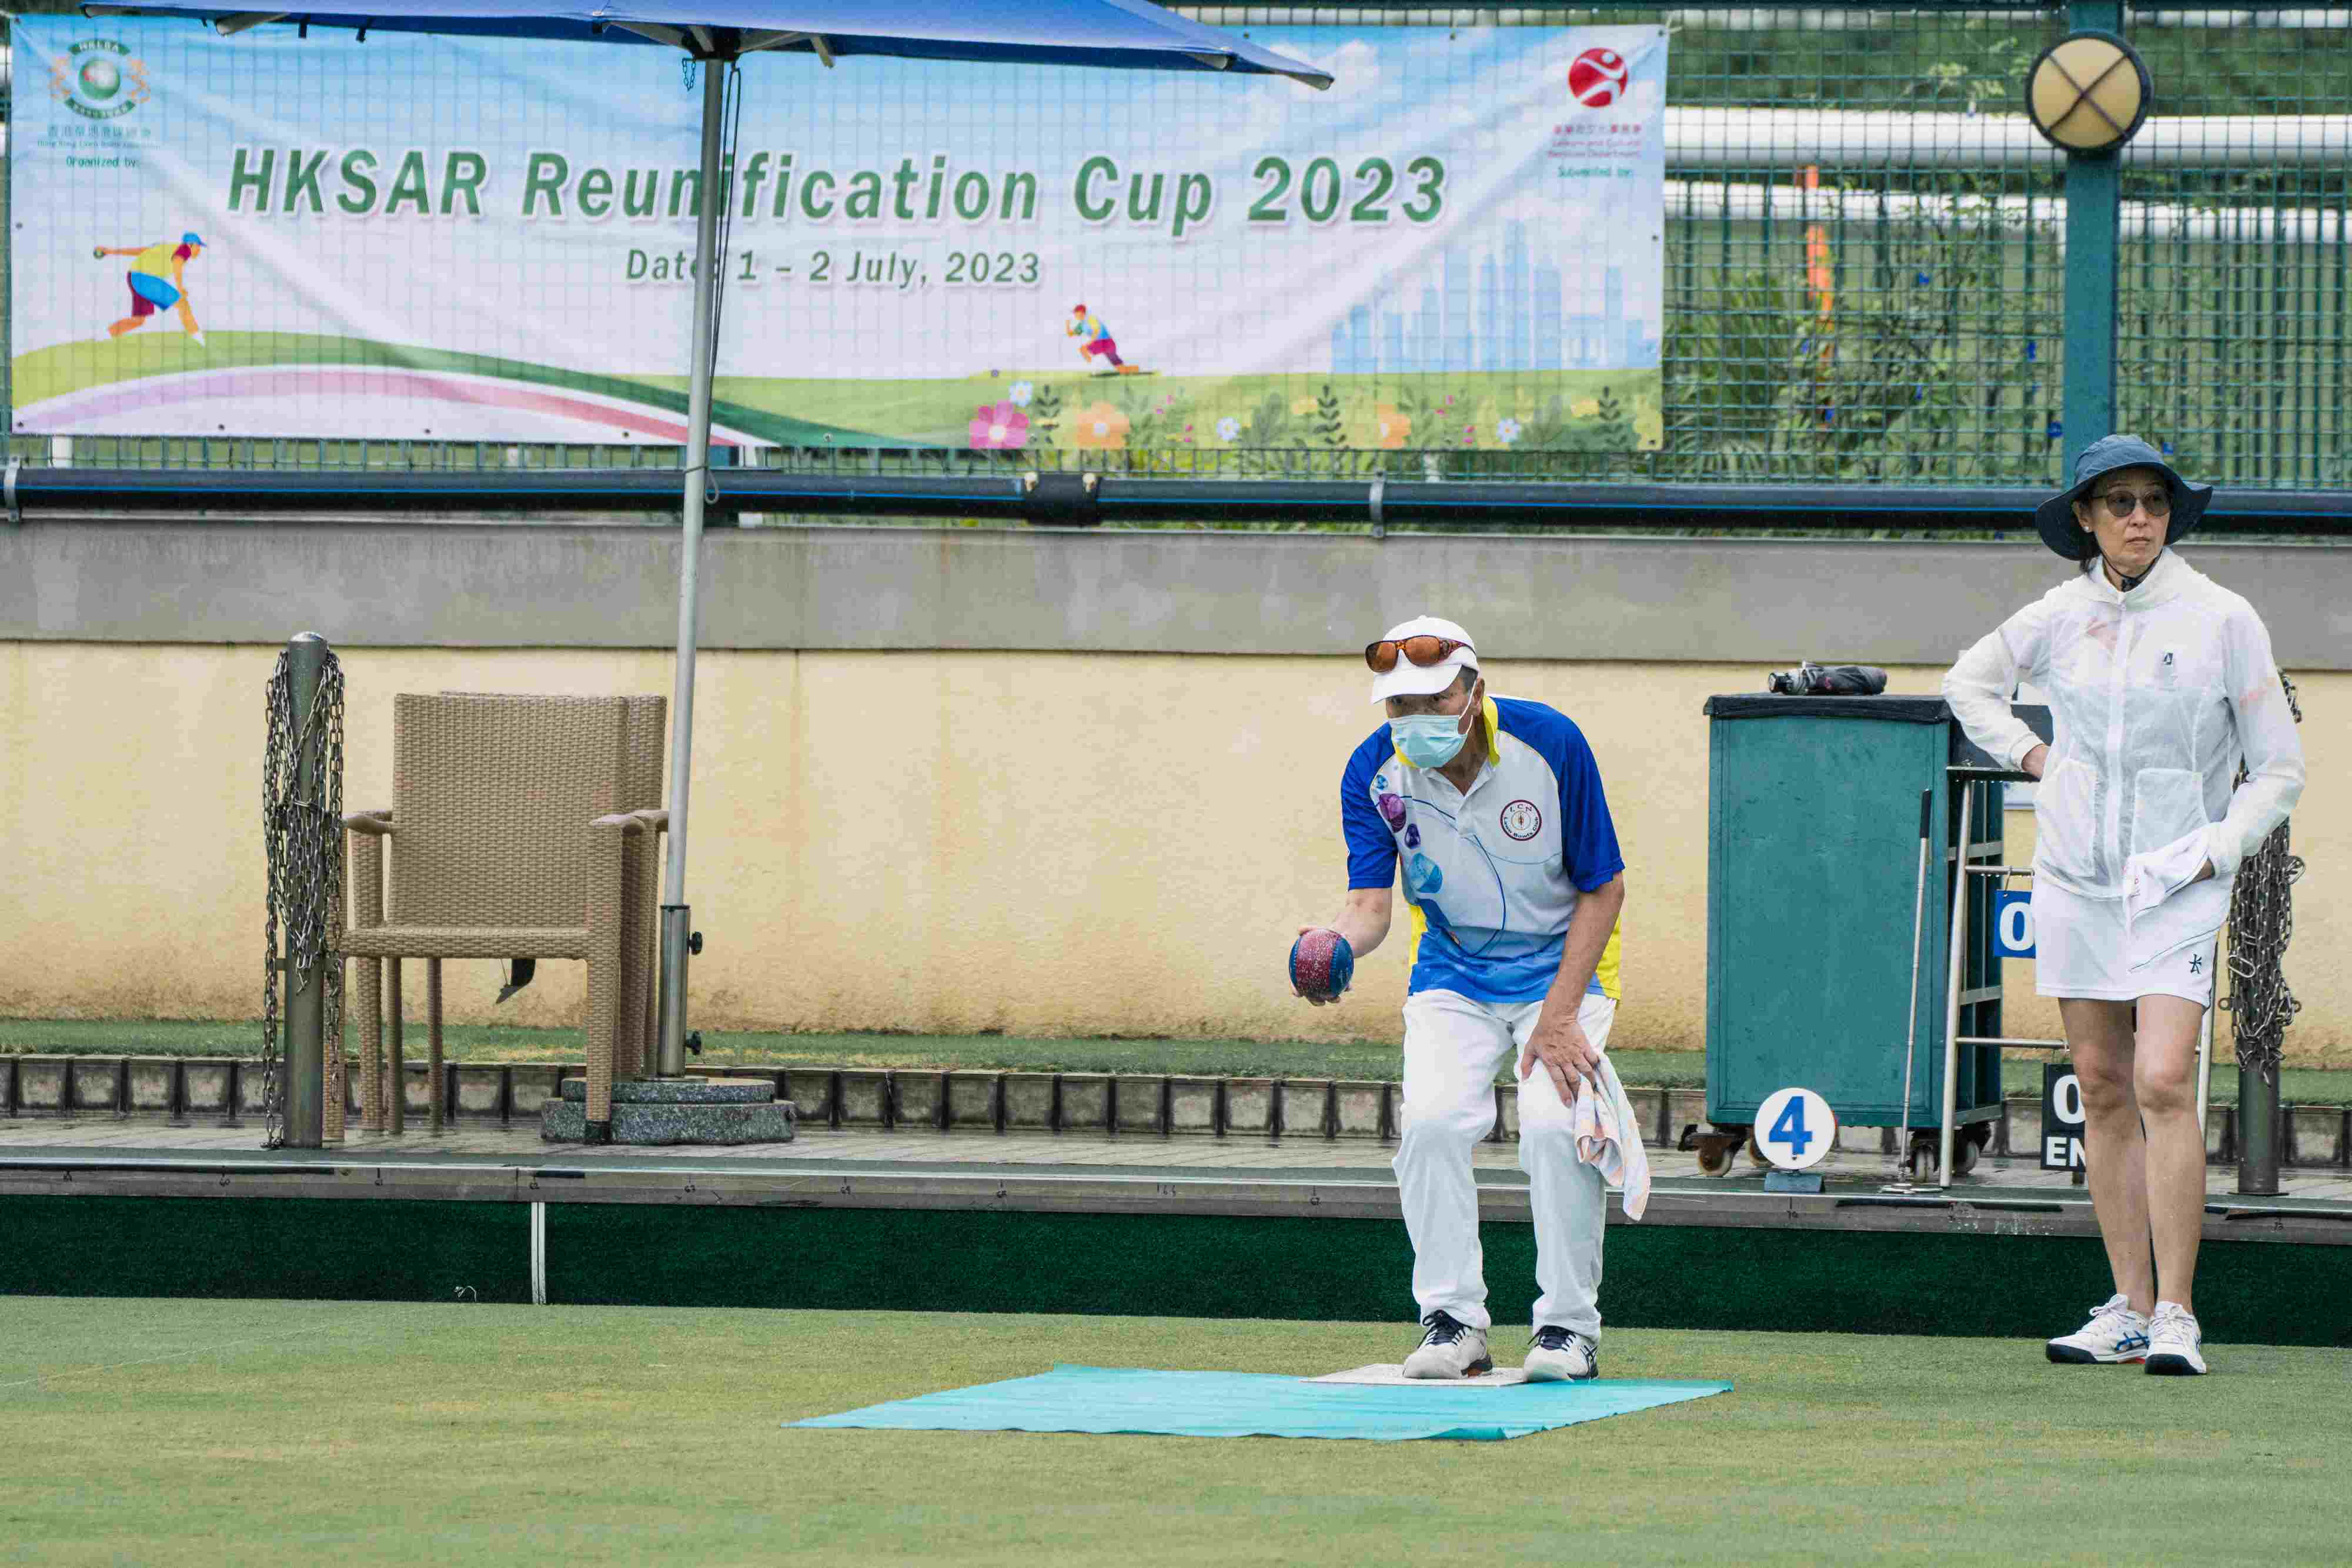 Photo link – HKSAR Reunification Cup 2023 (2 July, 2023) (Issued on 2/10/23)